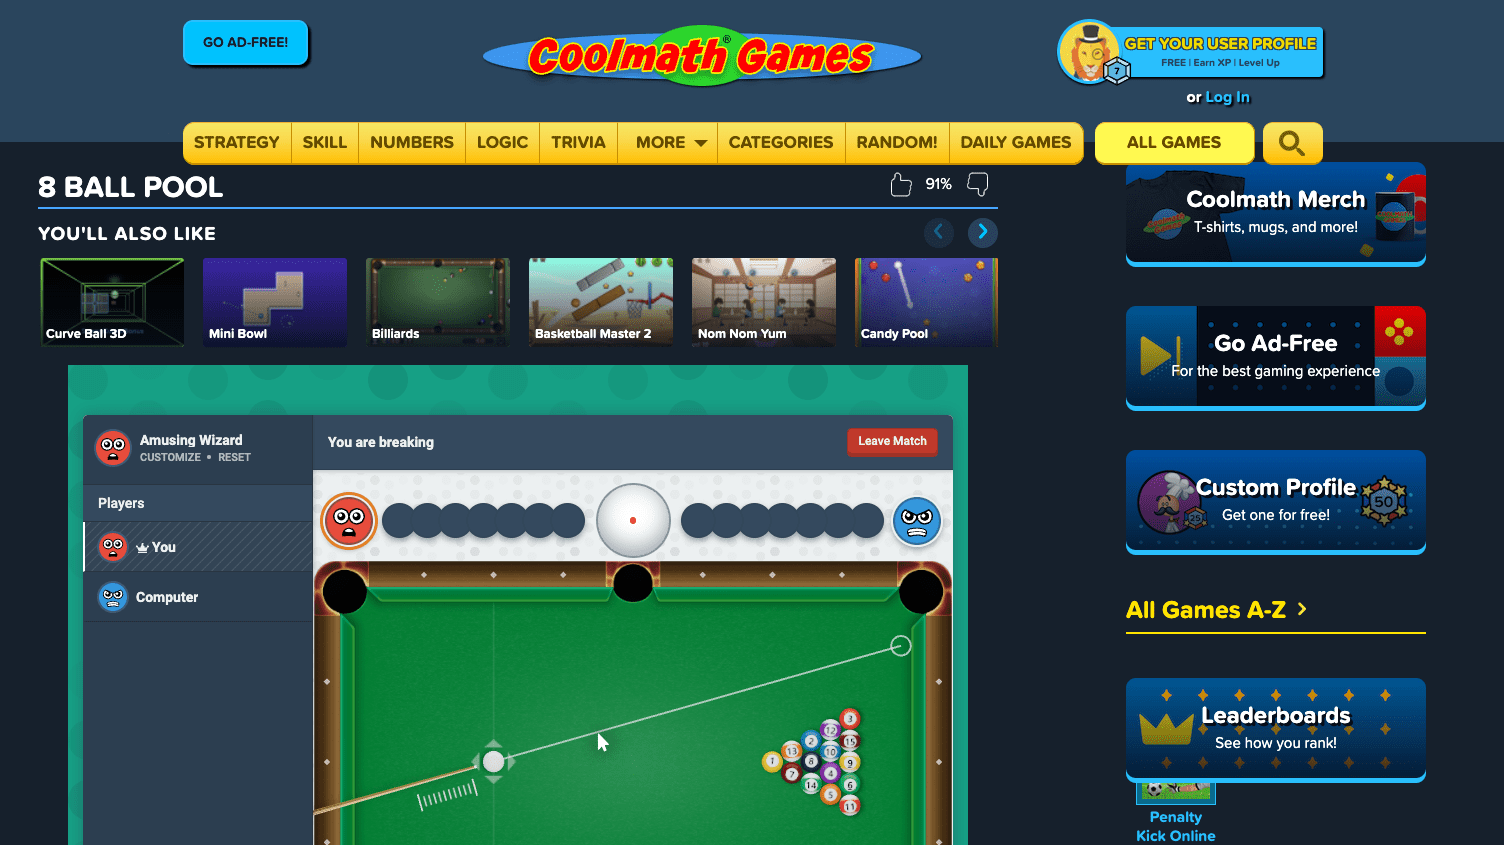 8 Ball Pool for Coolmath Games